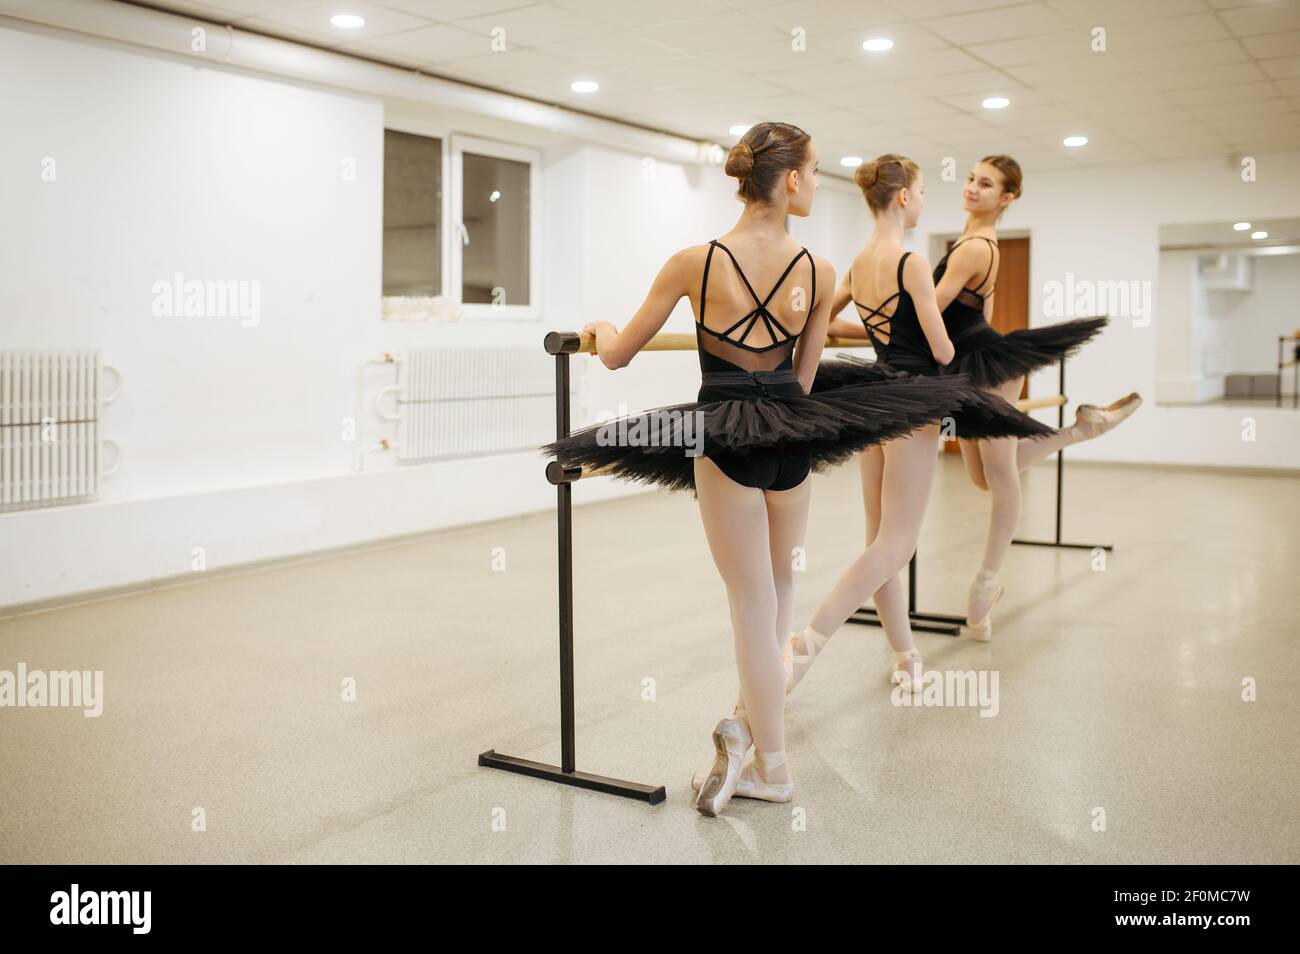 Elegant young ballerinas poses at barre in class Stock Photo